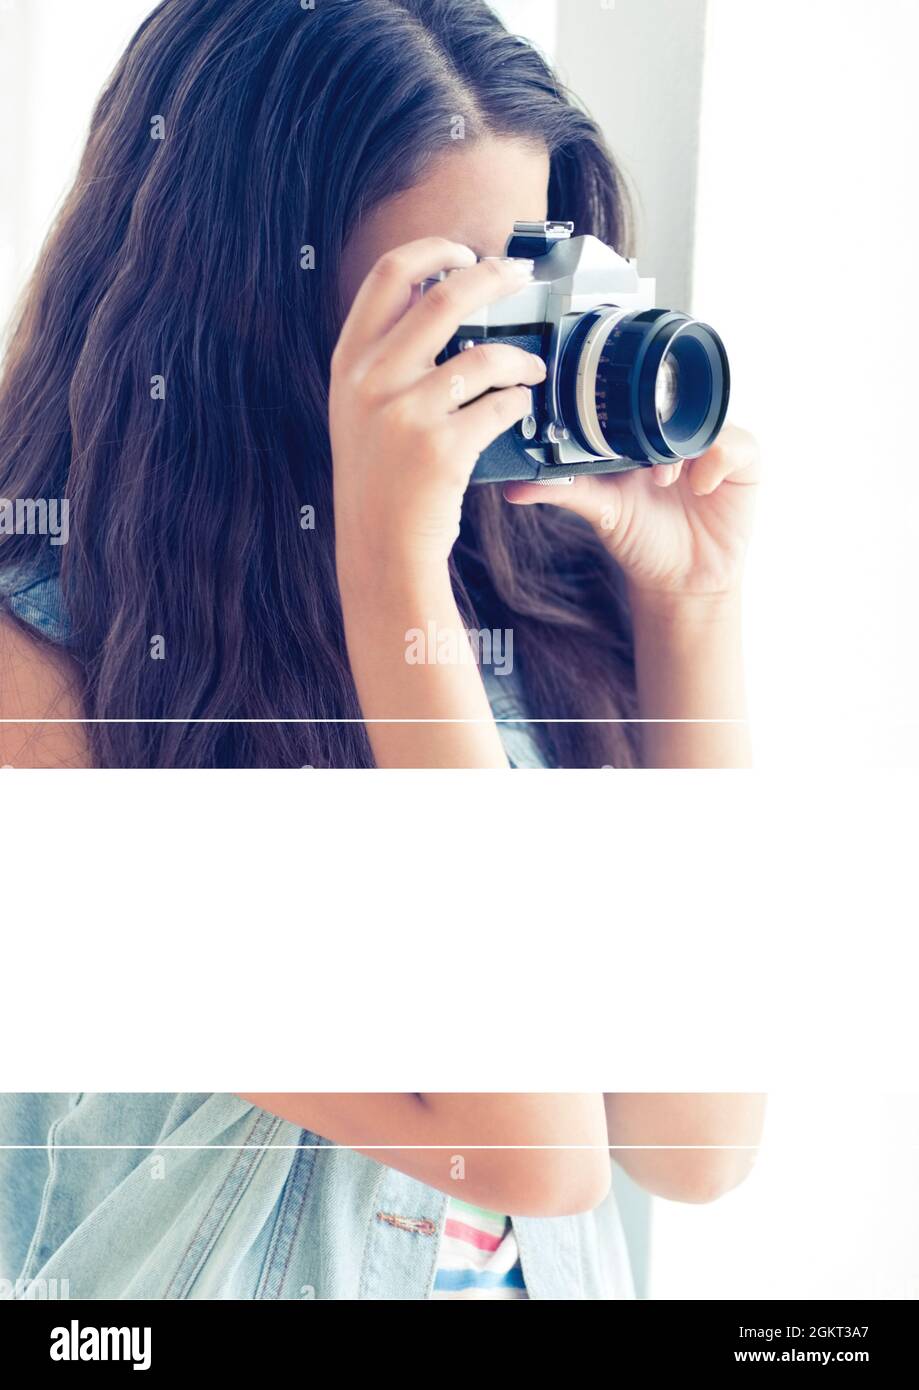 White banner with copy space against woman using digital camera Stock Photo